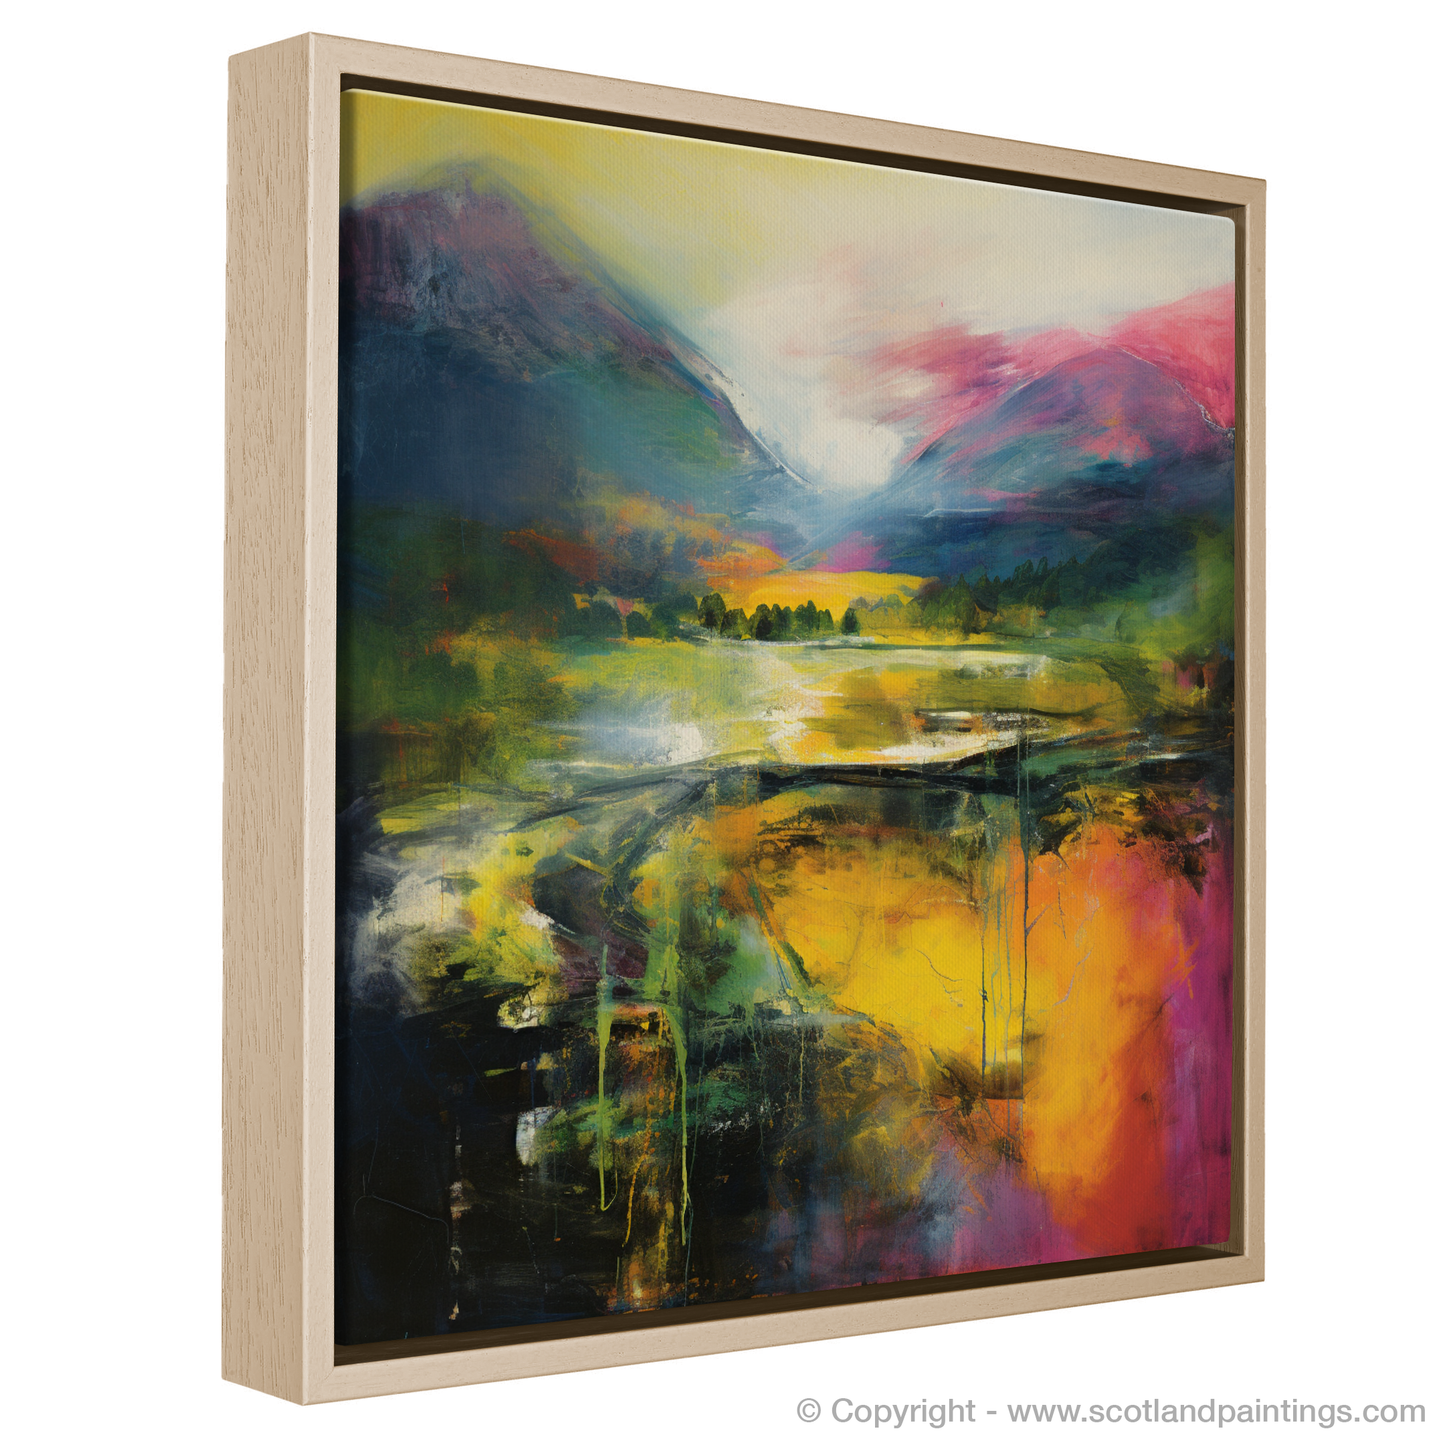 Painting and Art Print of Glen Orchy, Argyll and Bute entitled "Glen Orchy Unleashed: An Abstract Expressionist Ode to the Scottish Highlands".